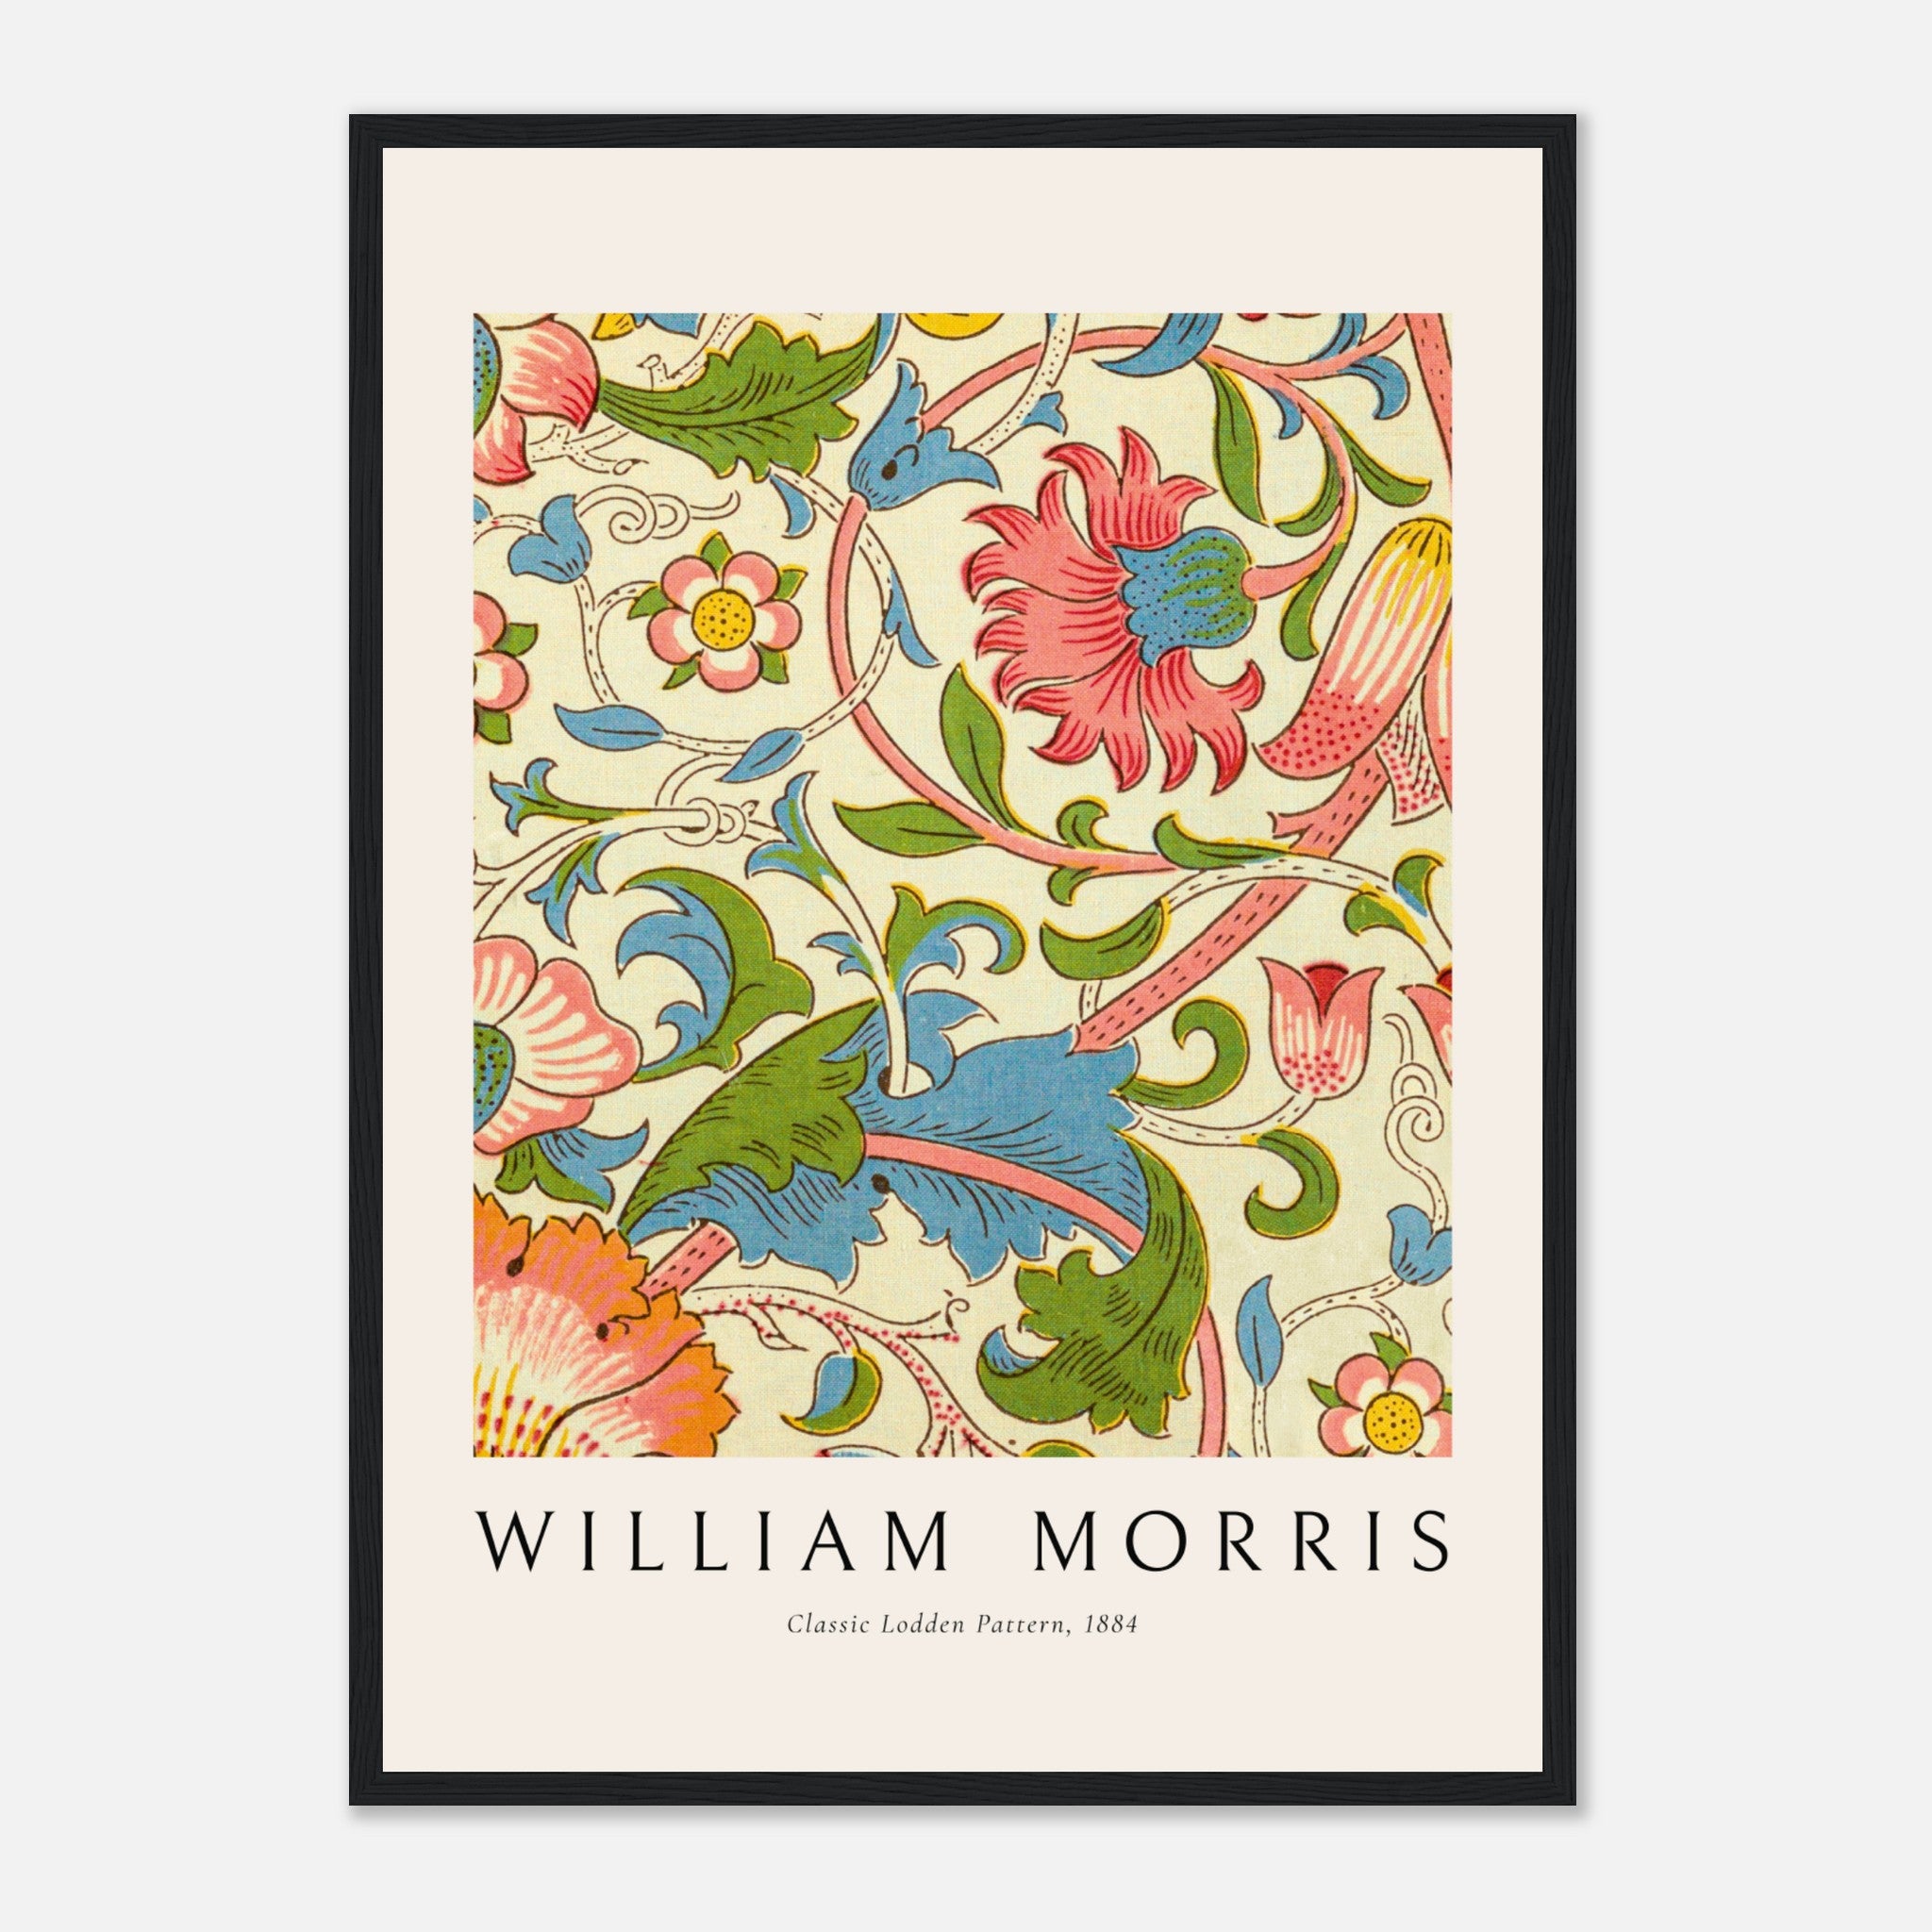 Classic Lodden Pattern by William Morris Poster